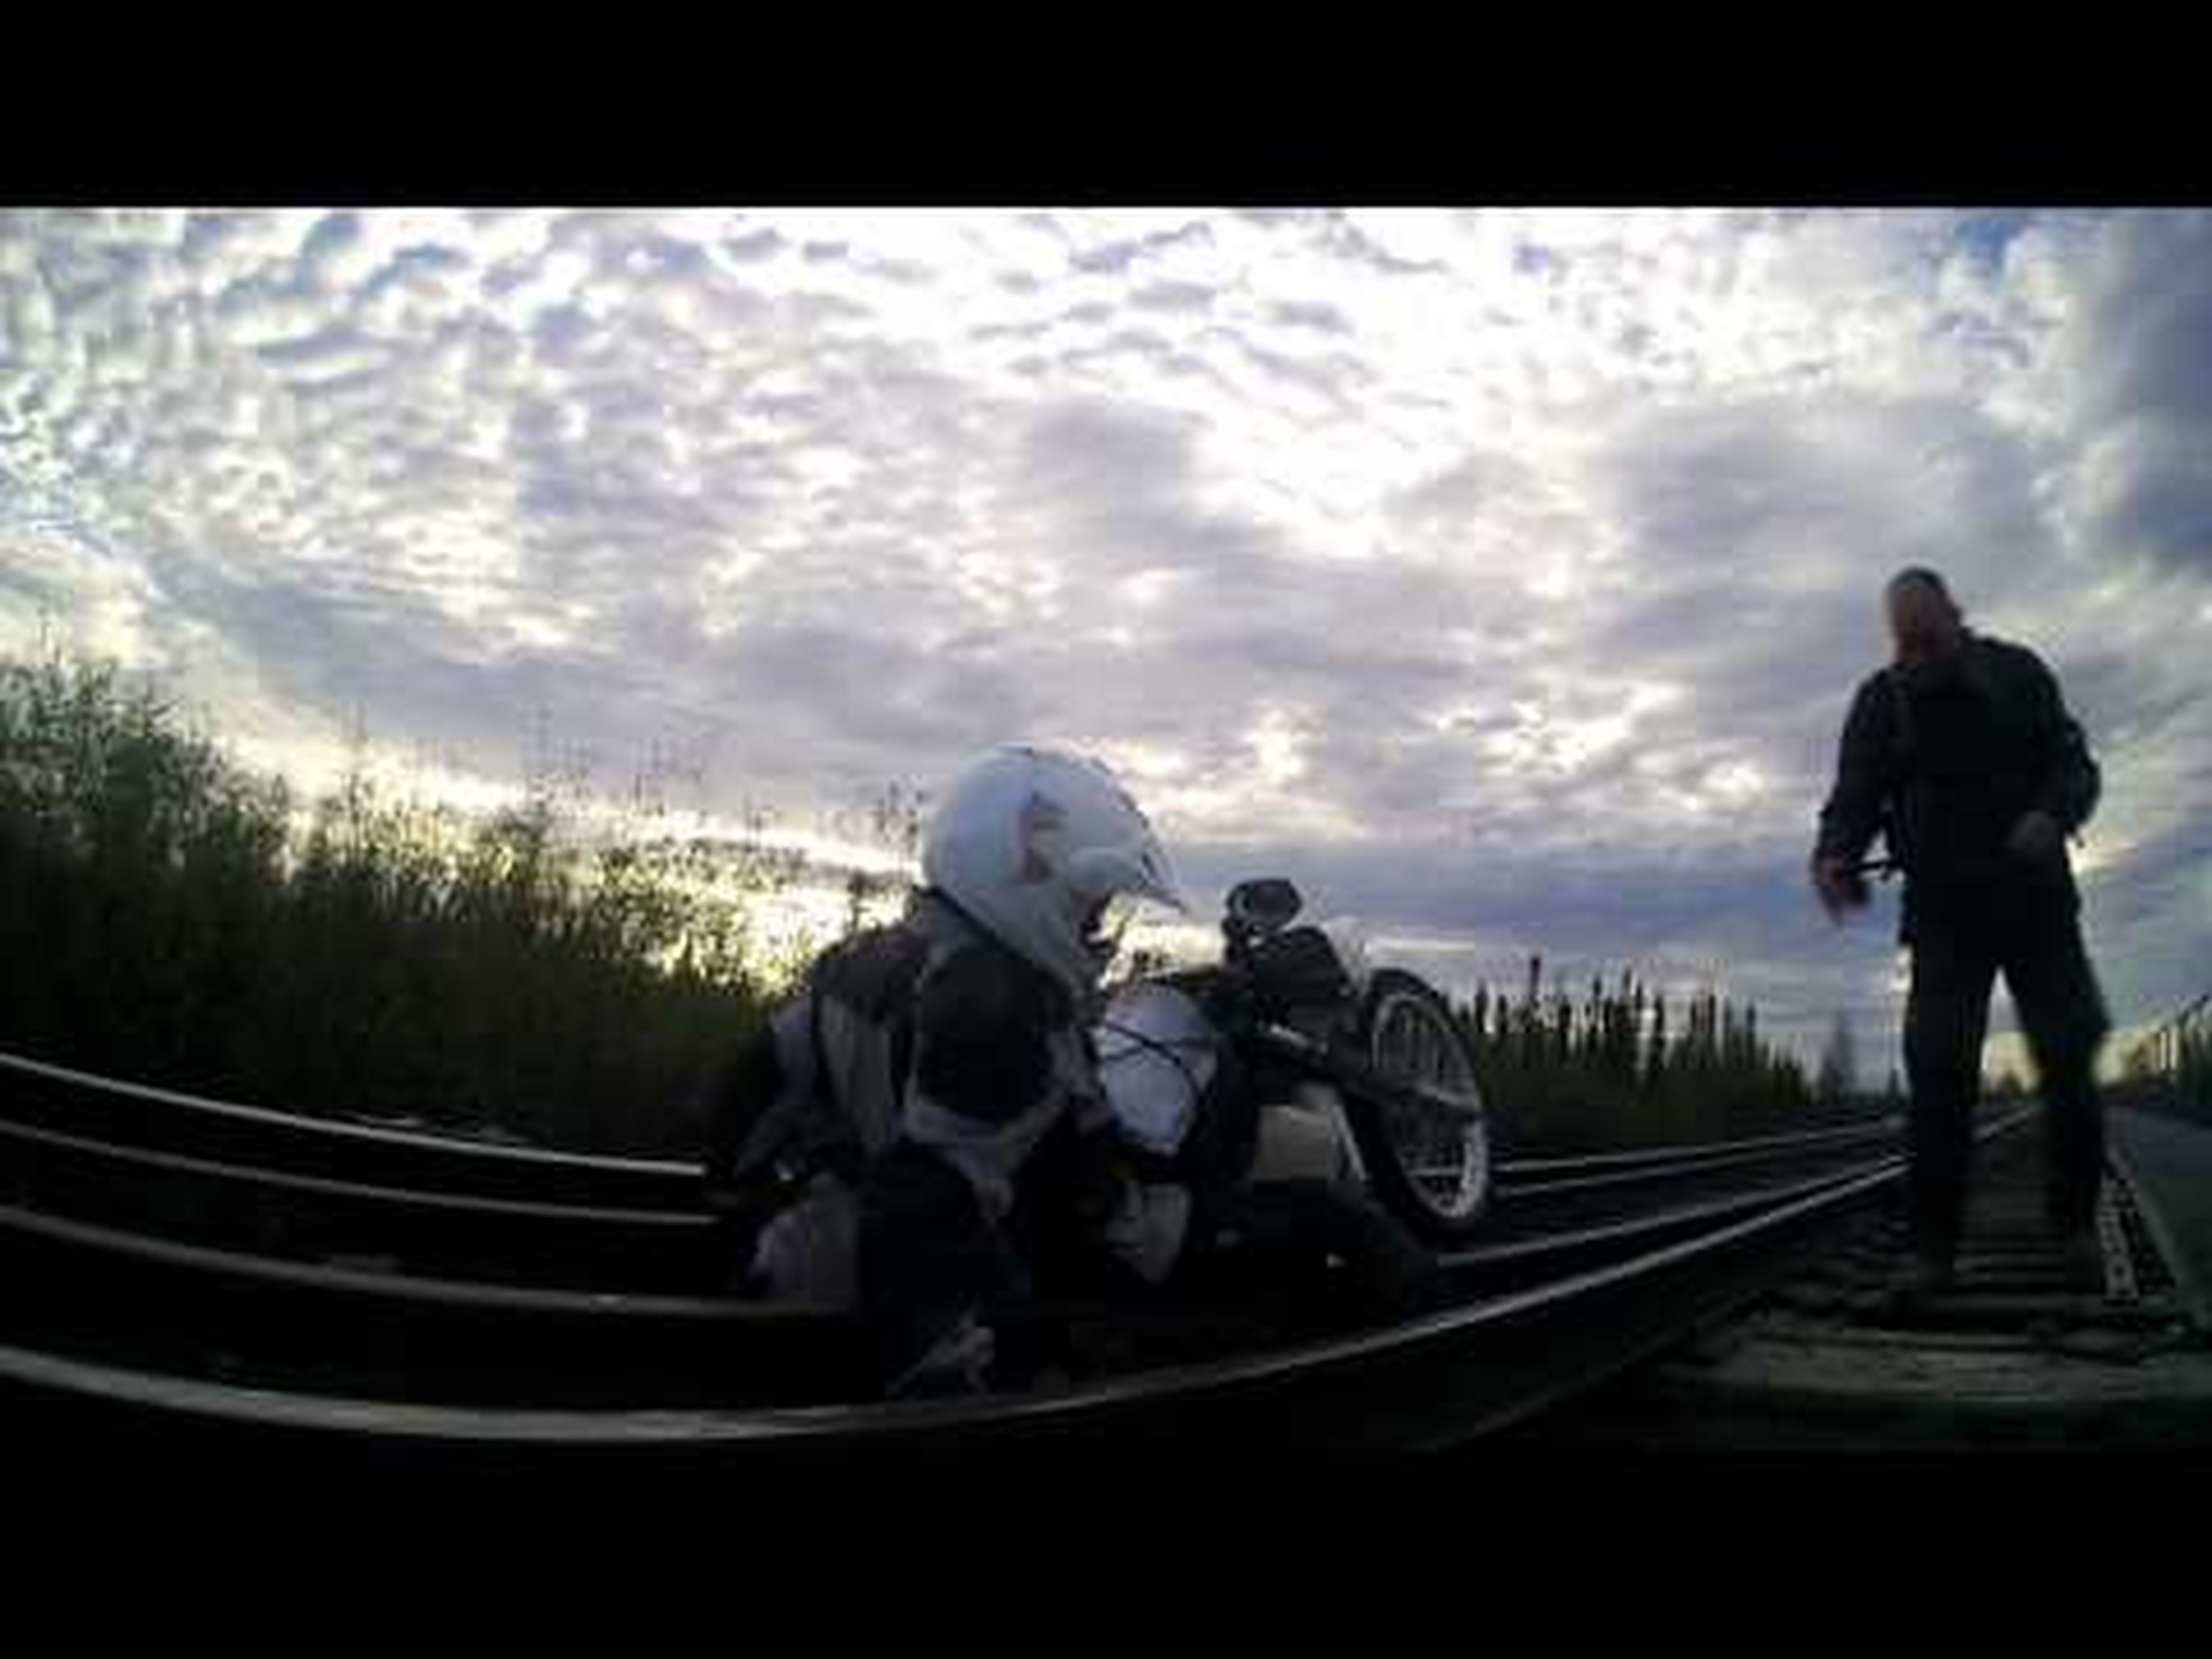 Motorcycle Falls Through Railroad Track! Some NSFW (but entirely appropriate) Language!